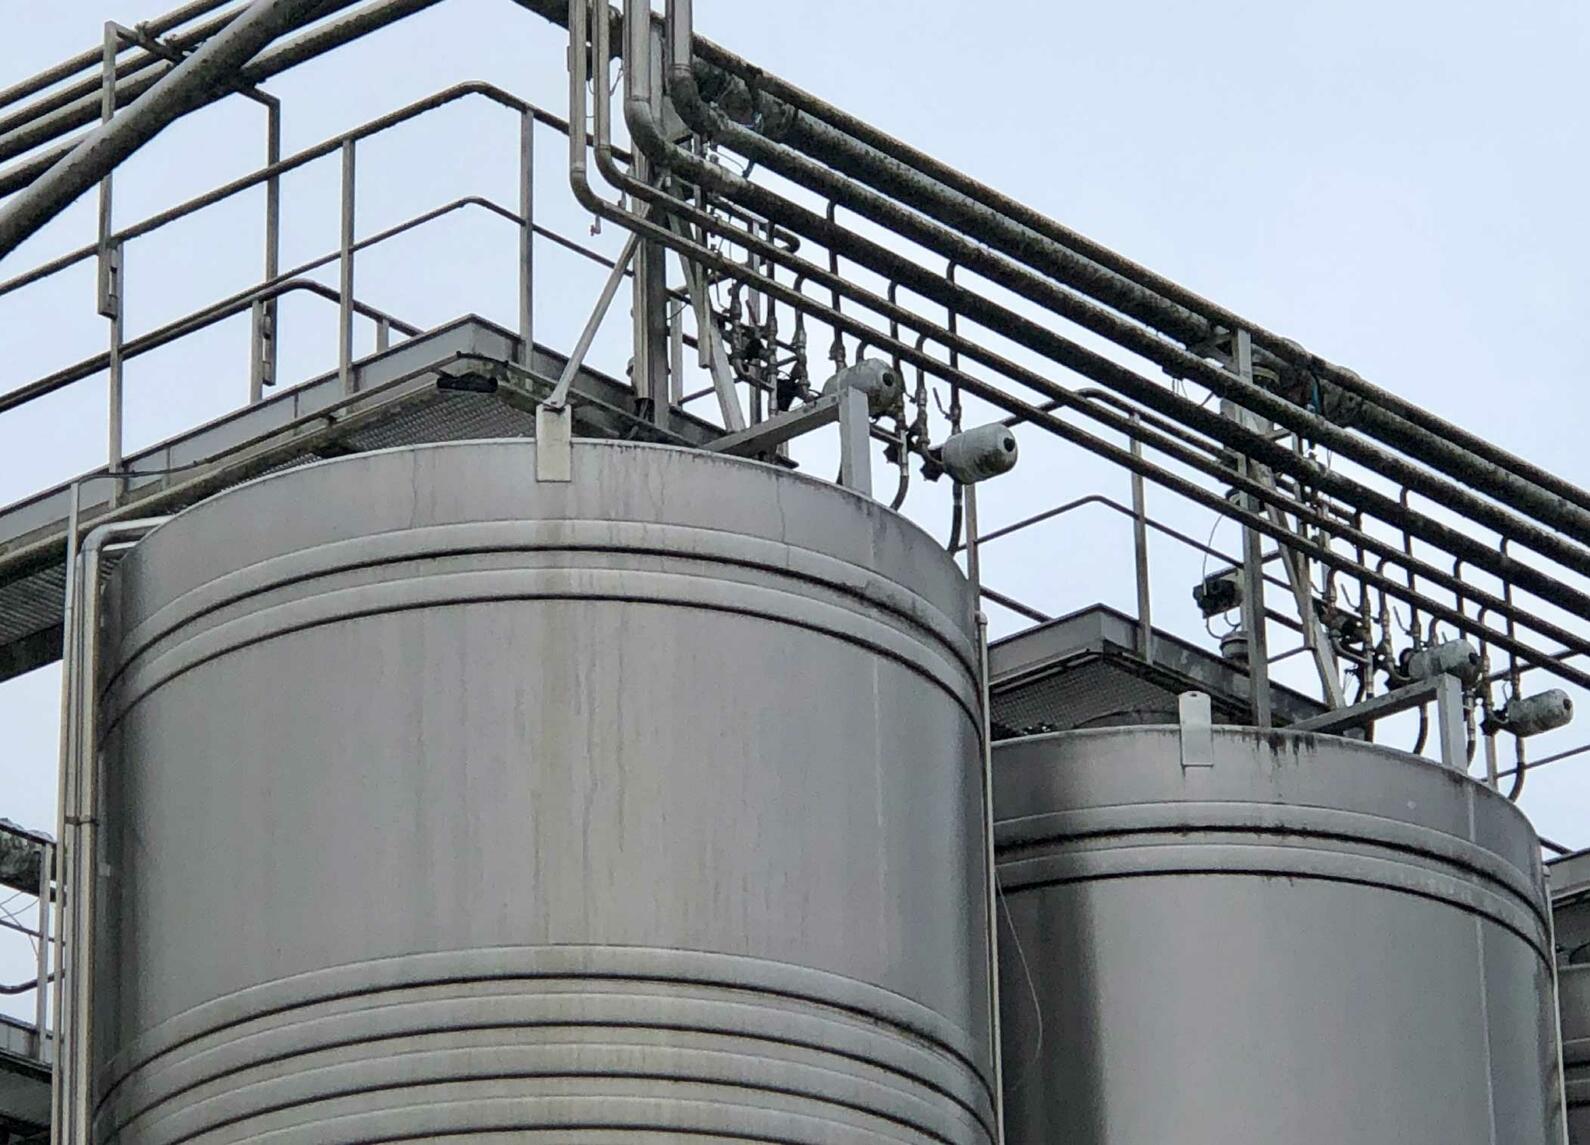 Stainless steel tank - Self-draining, compartmentalized